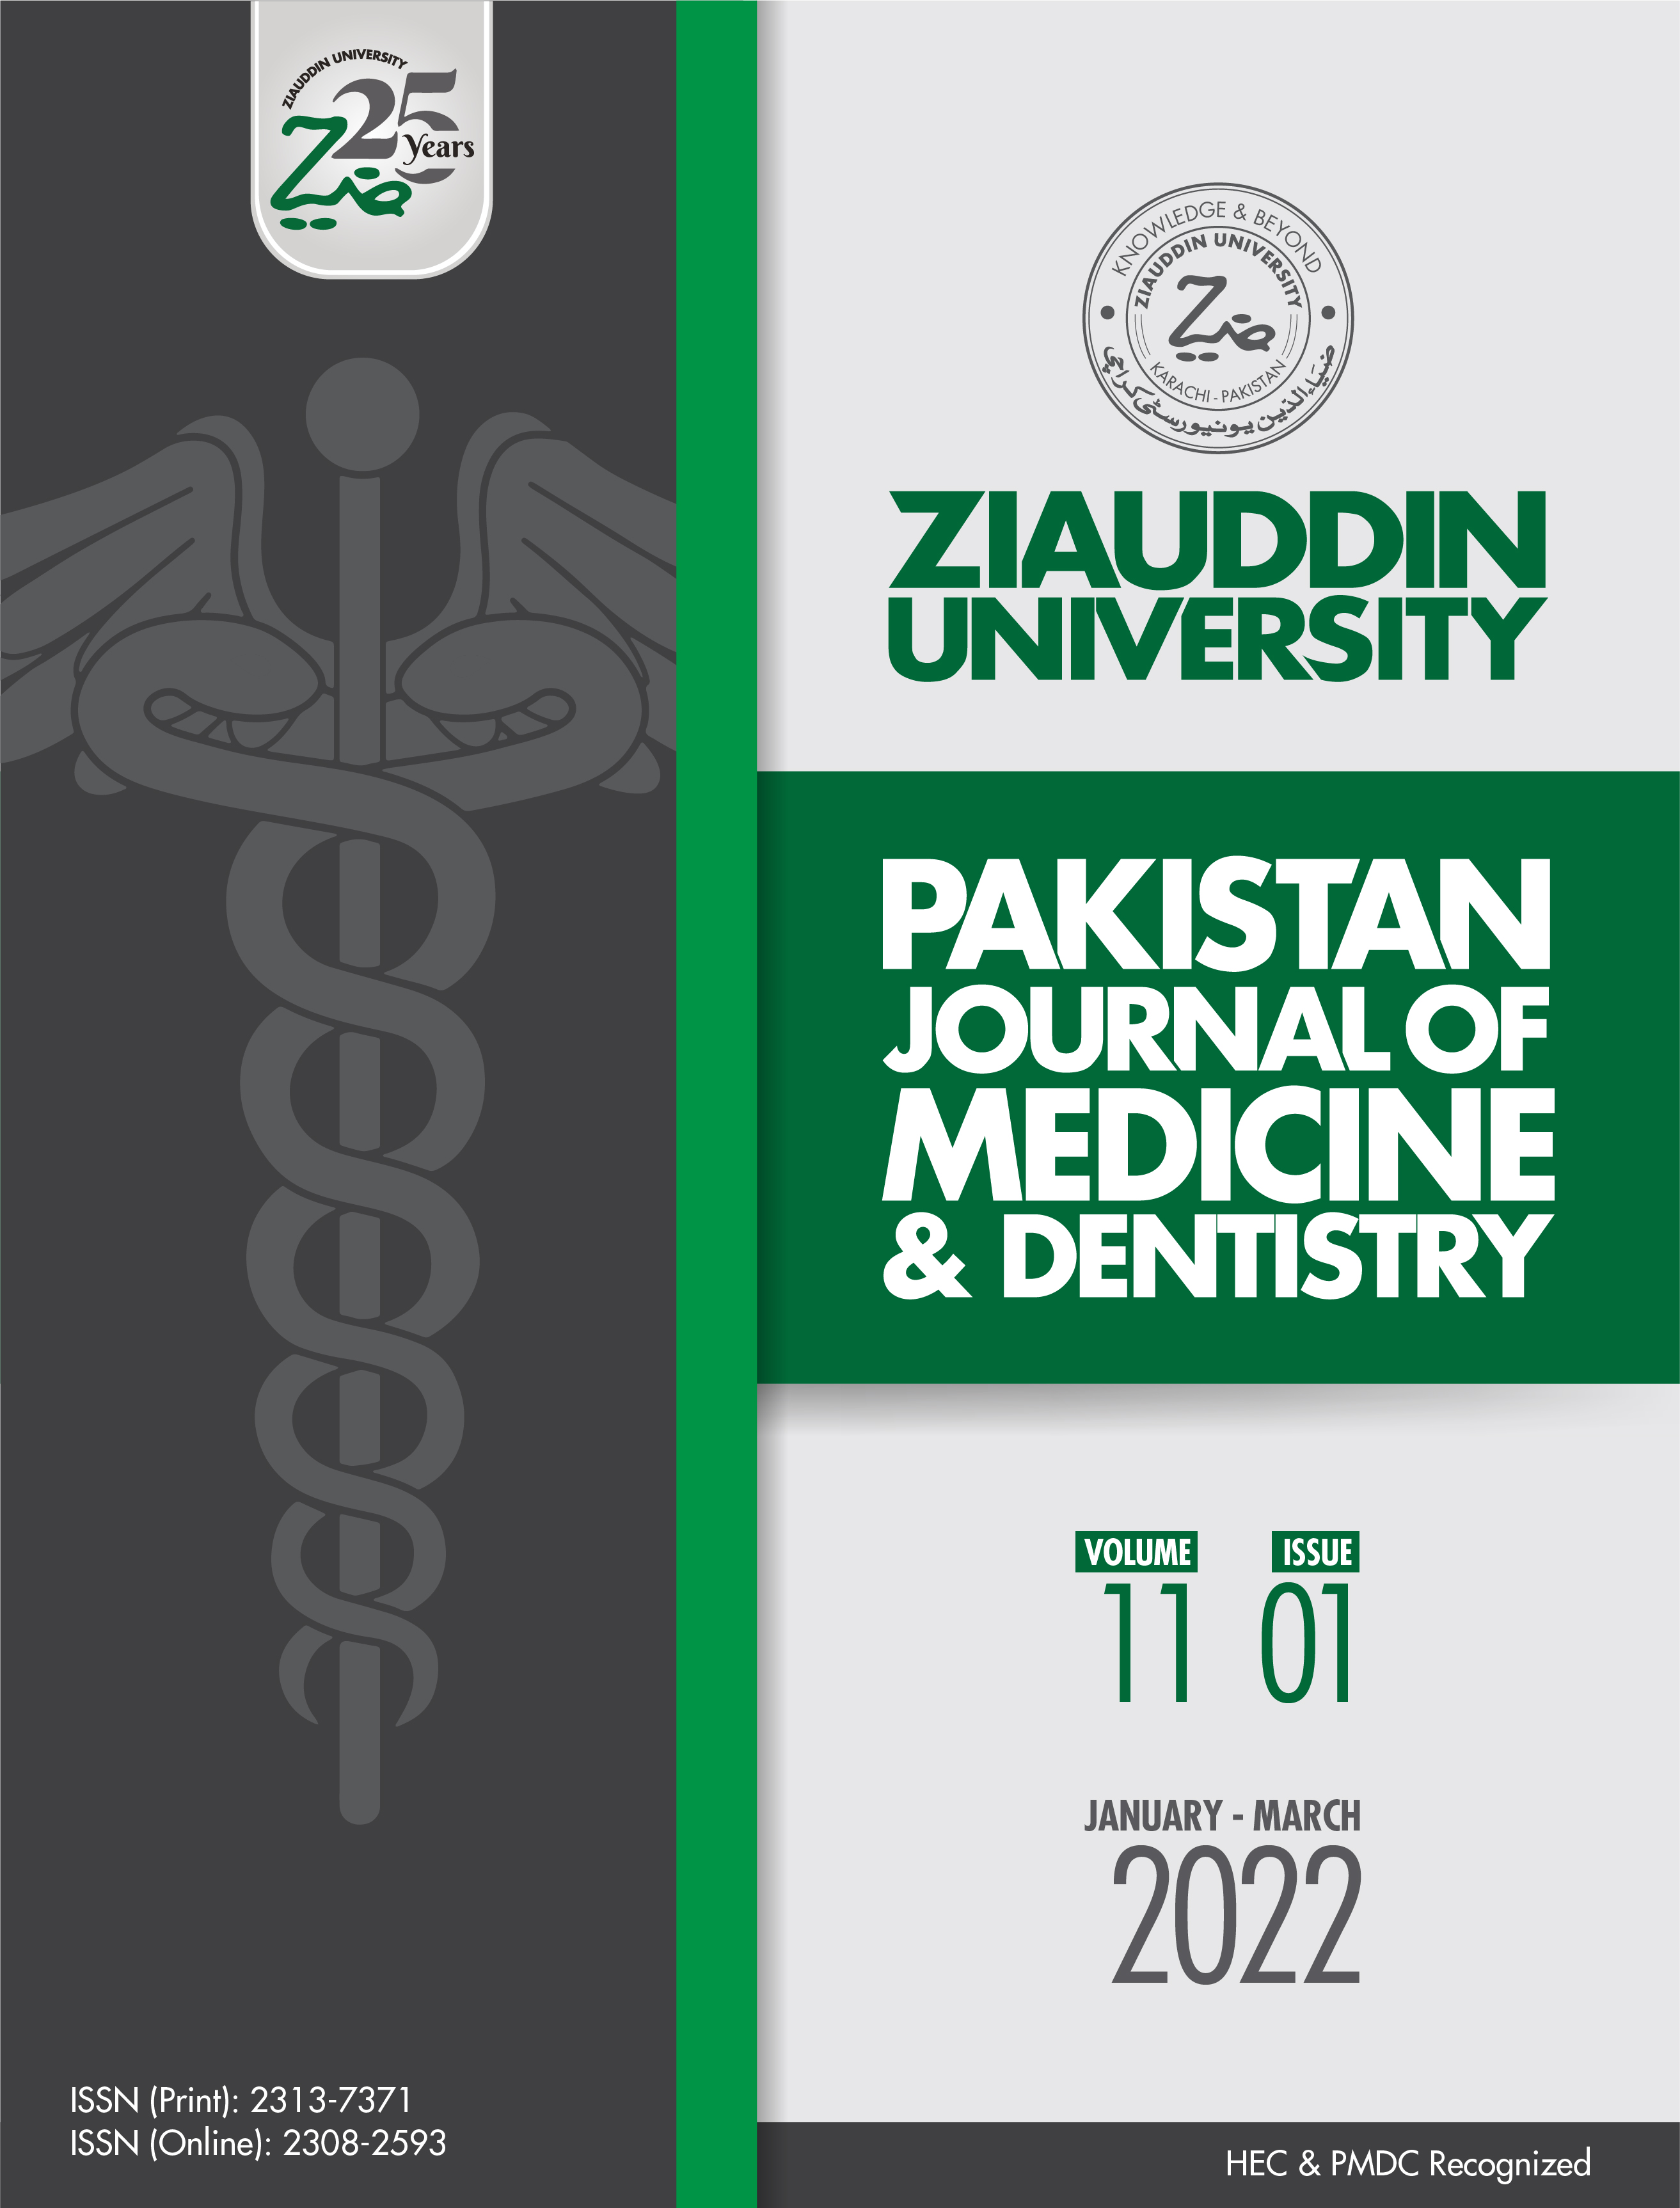 					View Vol. 11 No. 1 (2022): Vol. 11 No. 1(2022): Pakistan Journal of Medicine and Dentistry, 11-1, January - March 2022
				